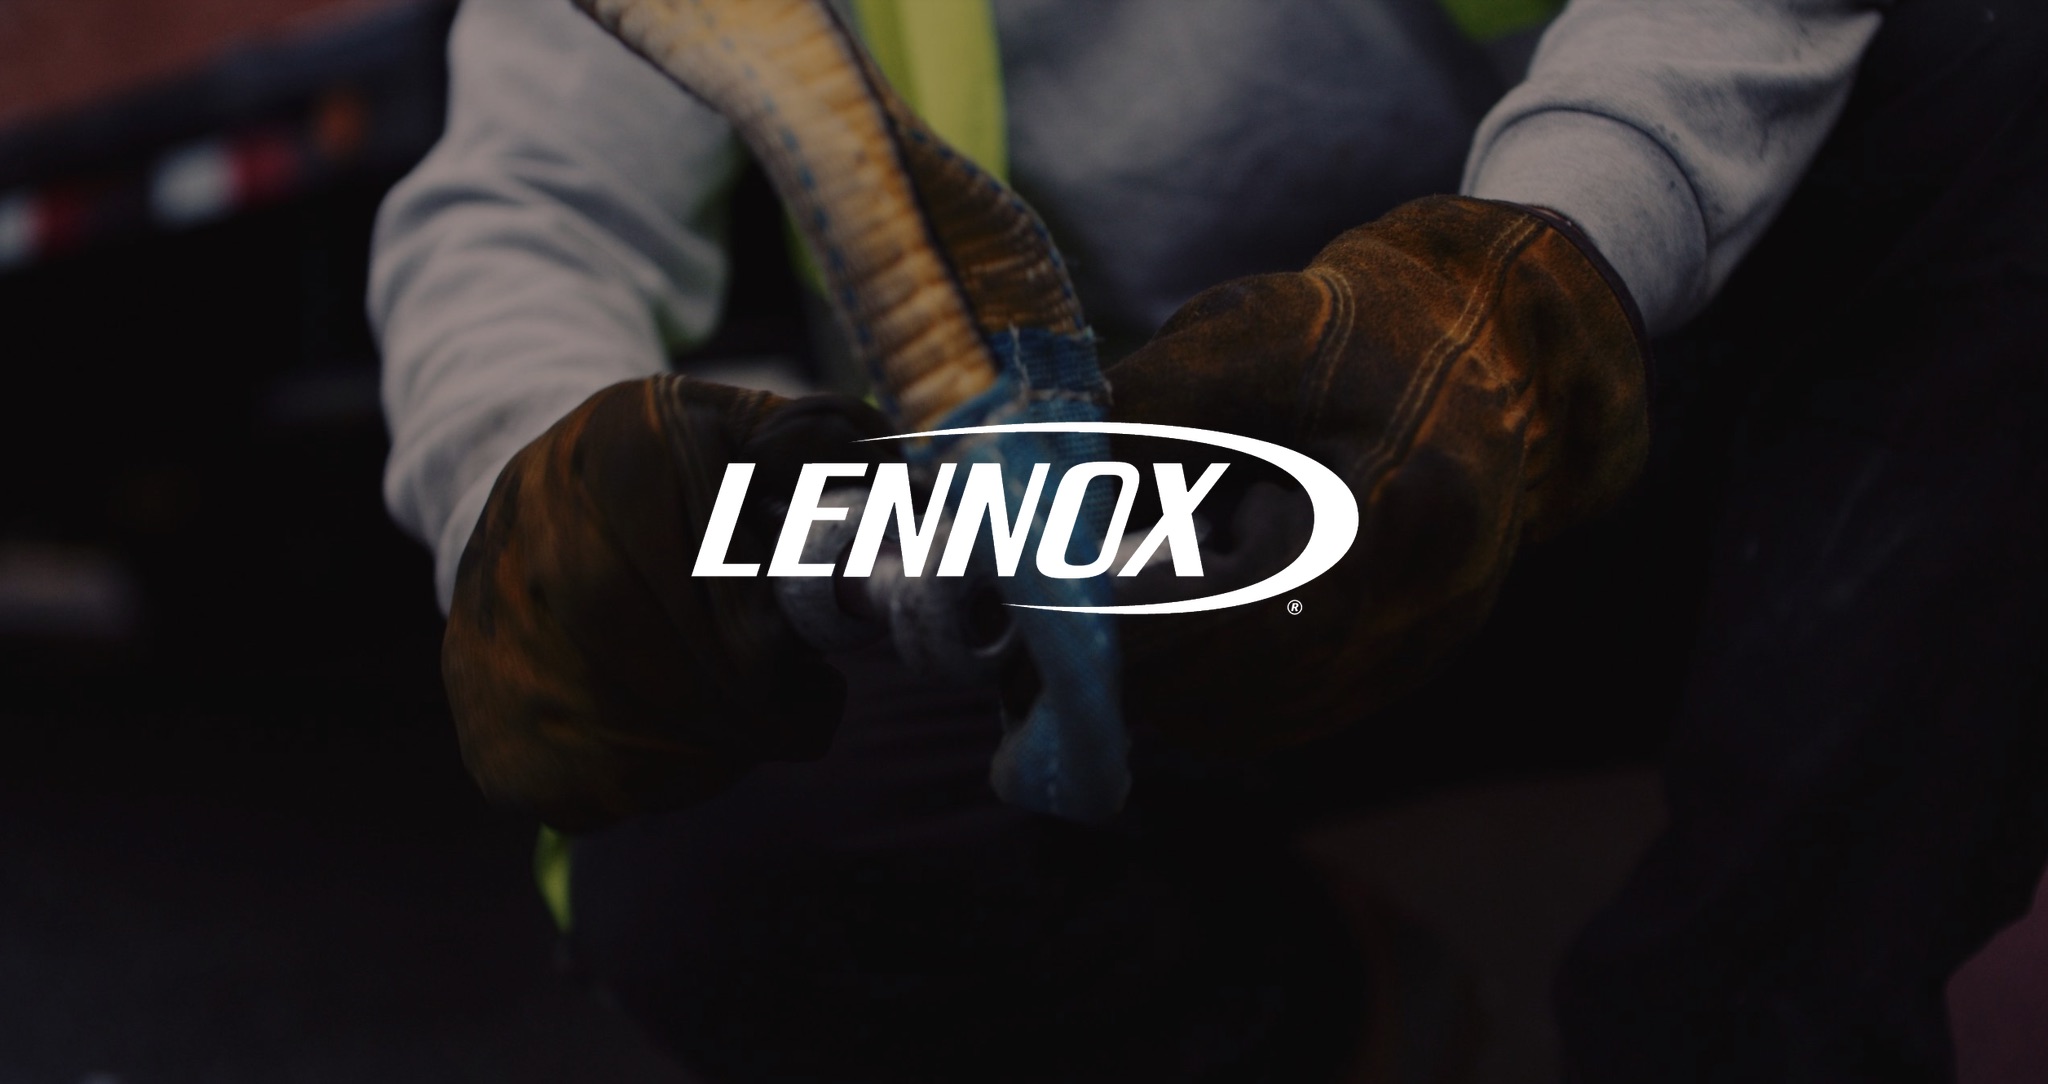 IU C&I Studios Page Lennox Heating & Cooling White Lennox logo with background closeup of leather gloved hands working with fastener